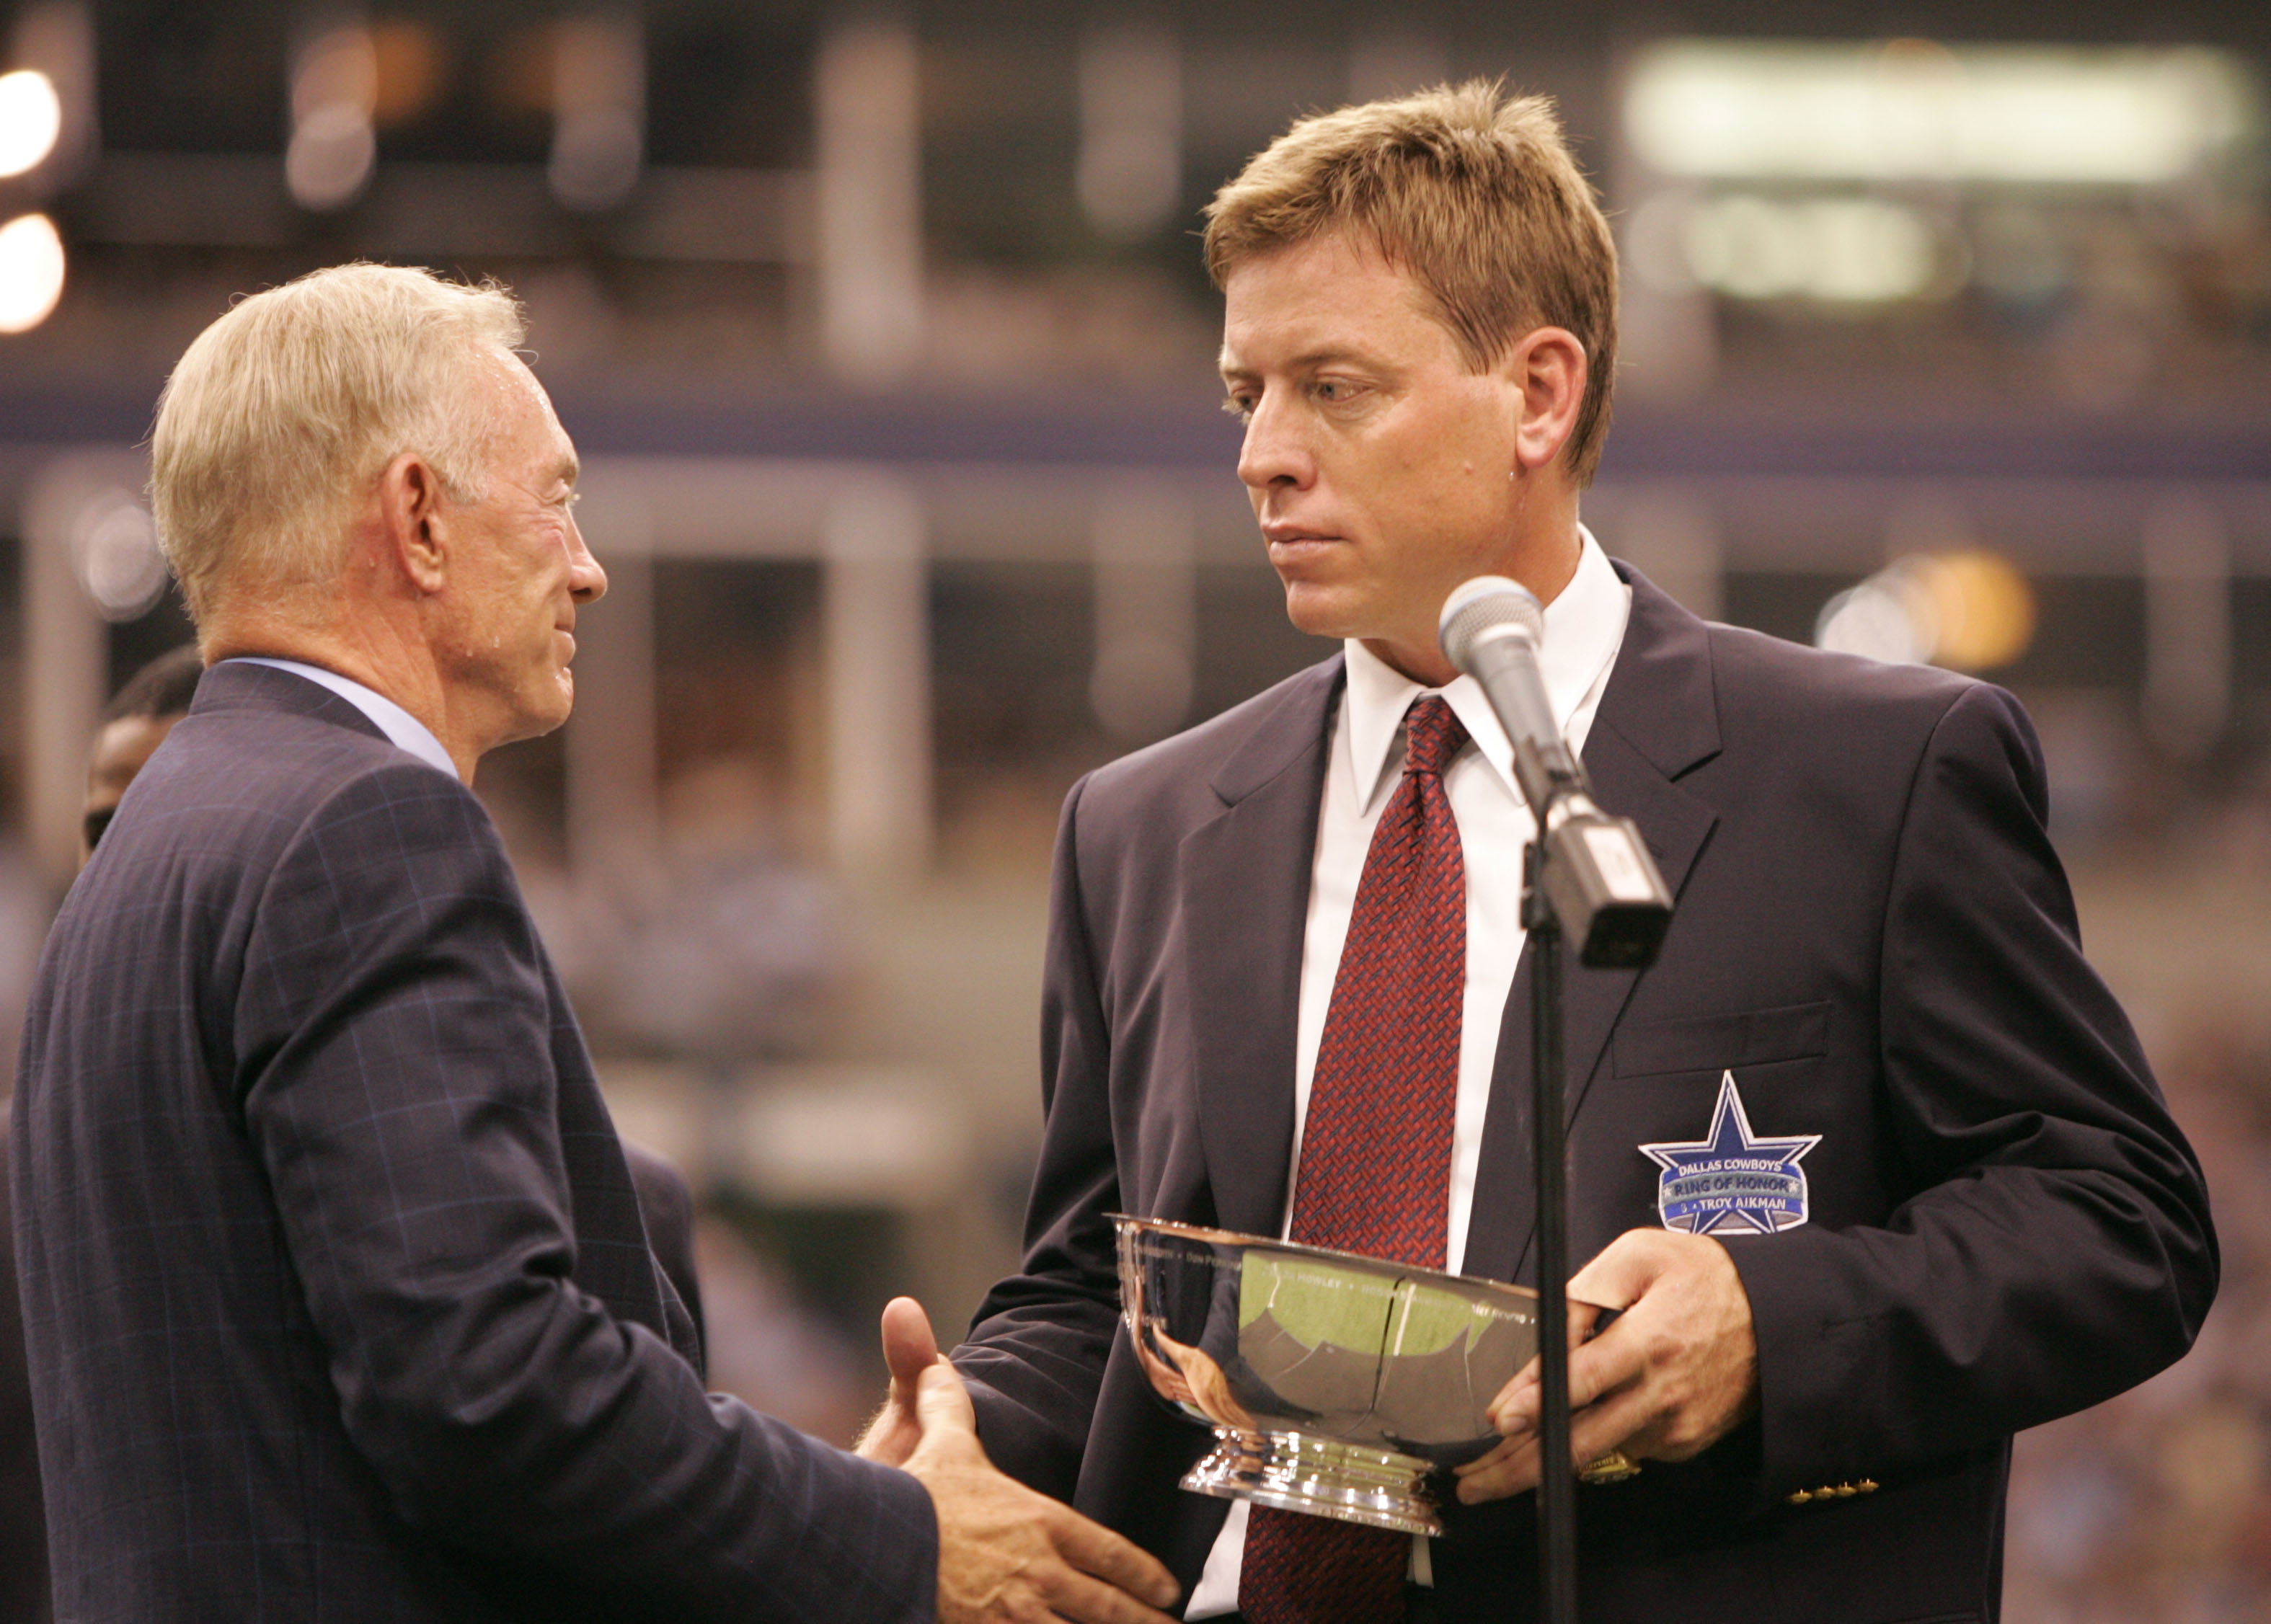 Dallas Cowboys owner Jerry Jones and former Dallas QB Troy Aikman during a 2005 ceremony in which Aikman was inducted into the Cowboys' Ring of Honor